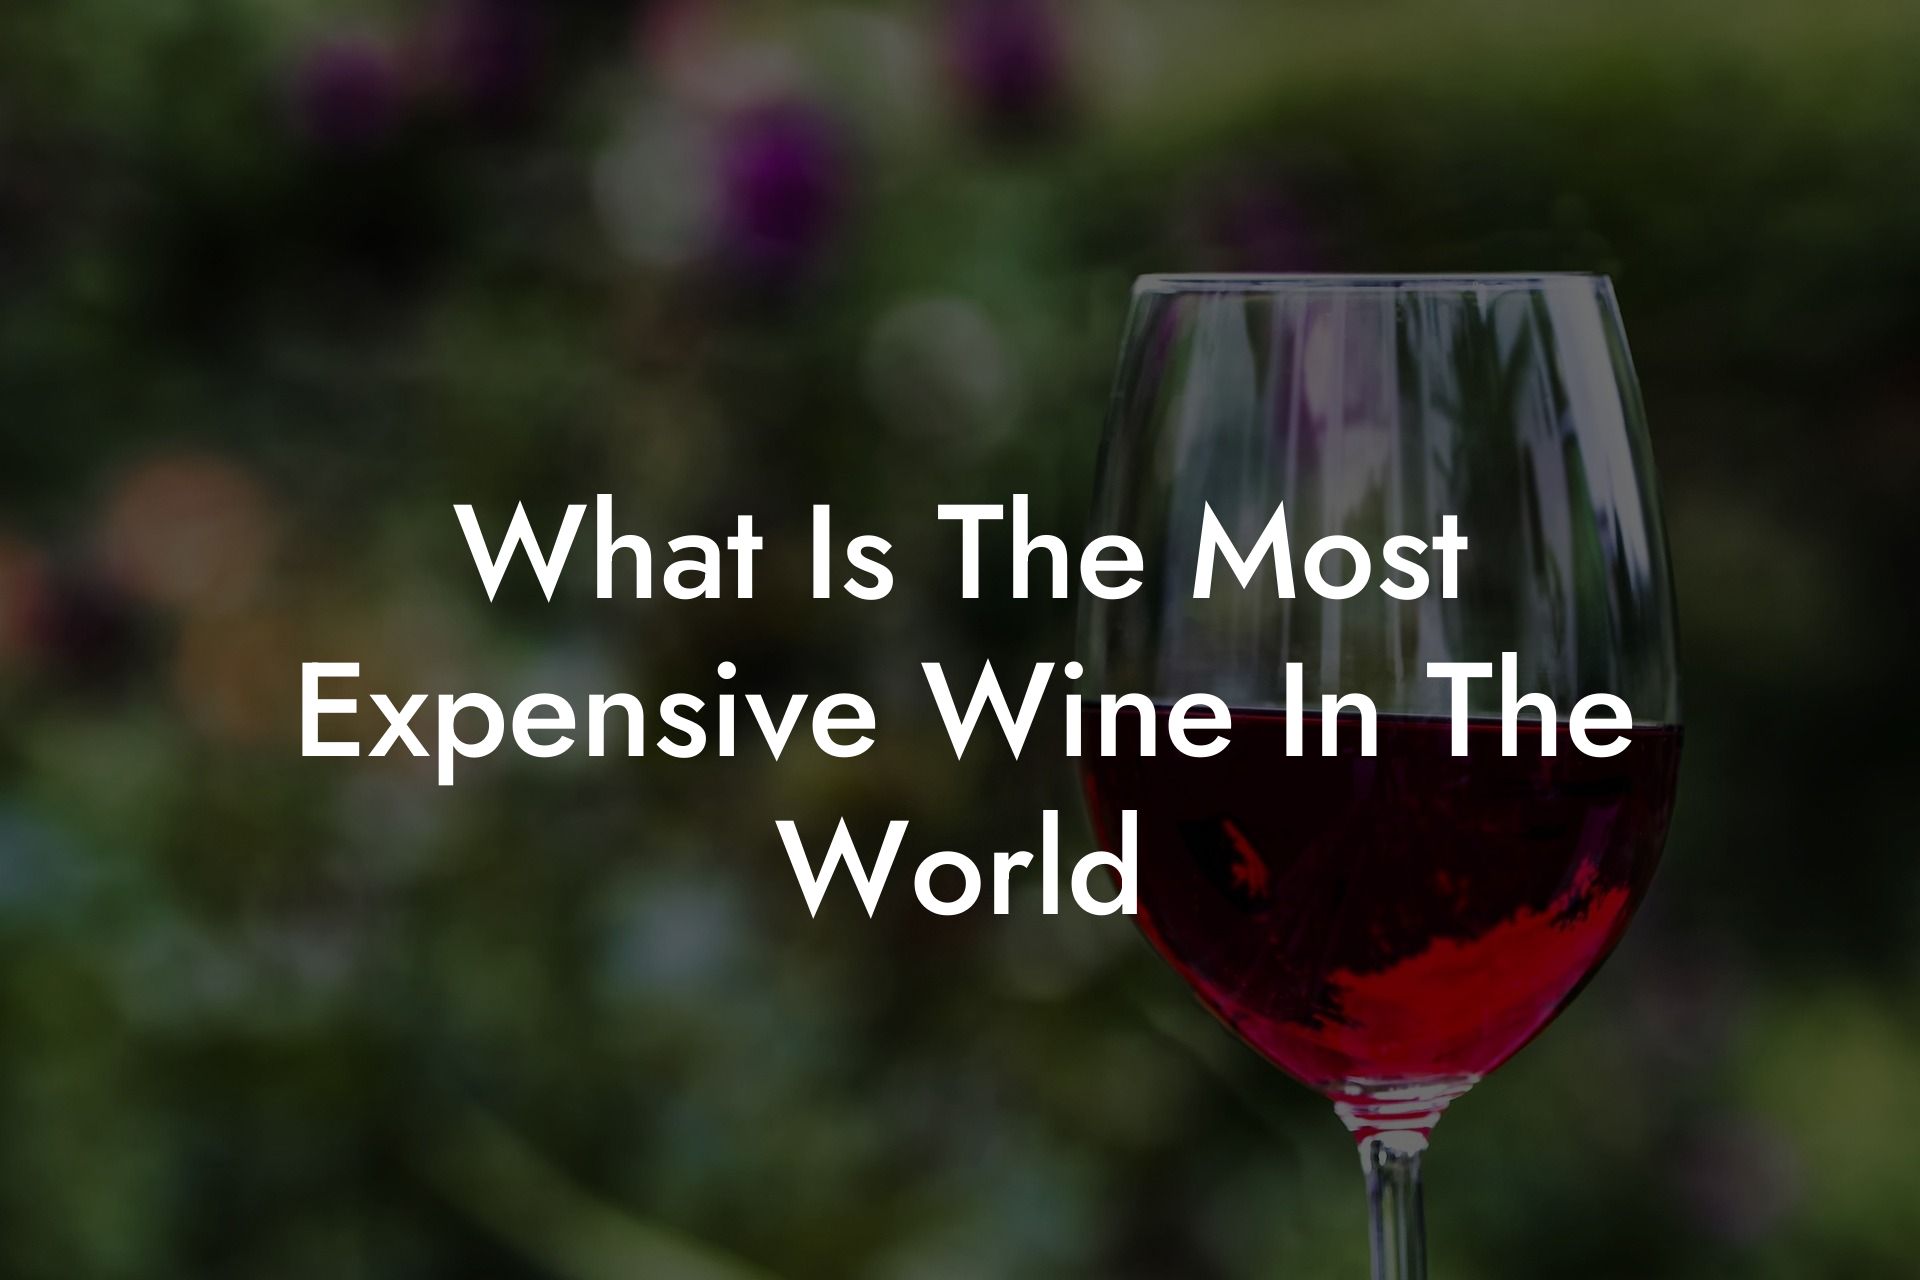 What Is The Most Expensive Wine In The World